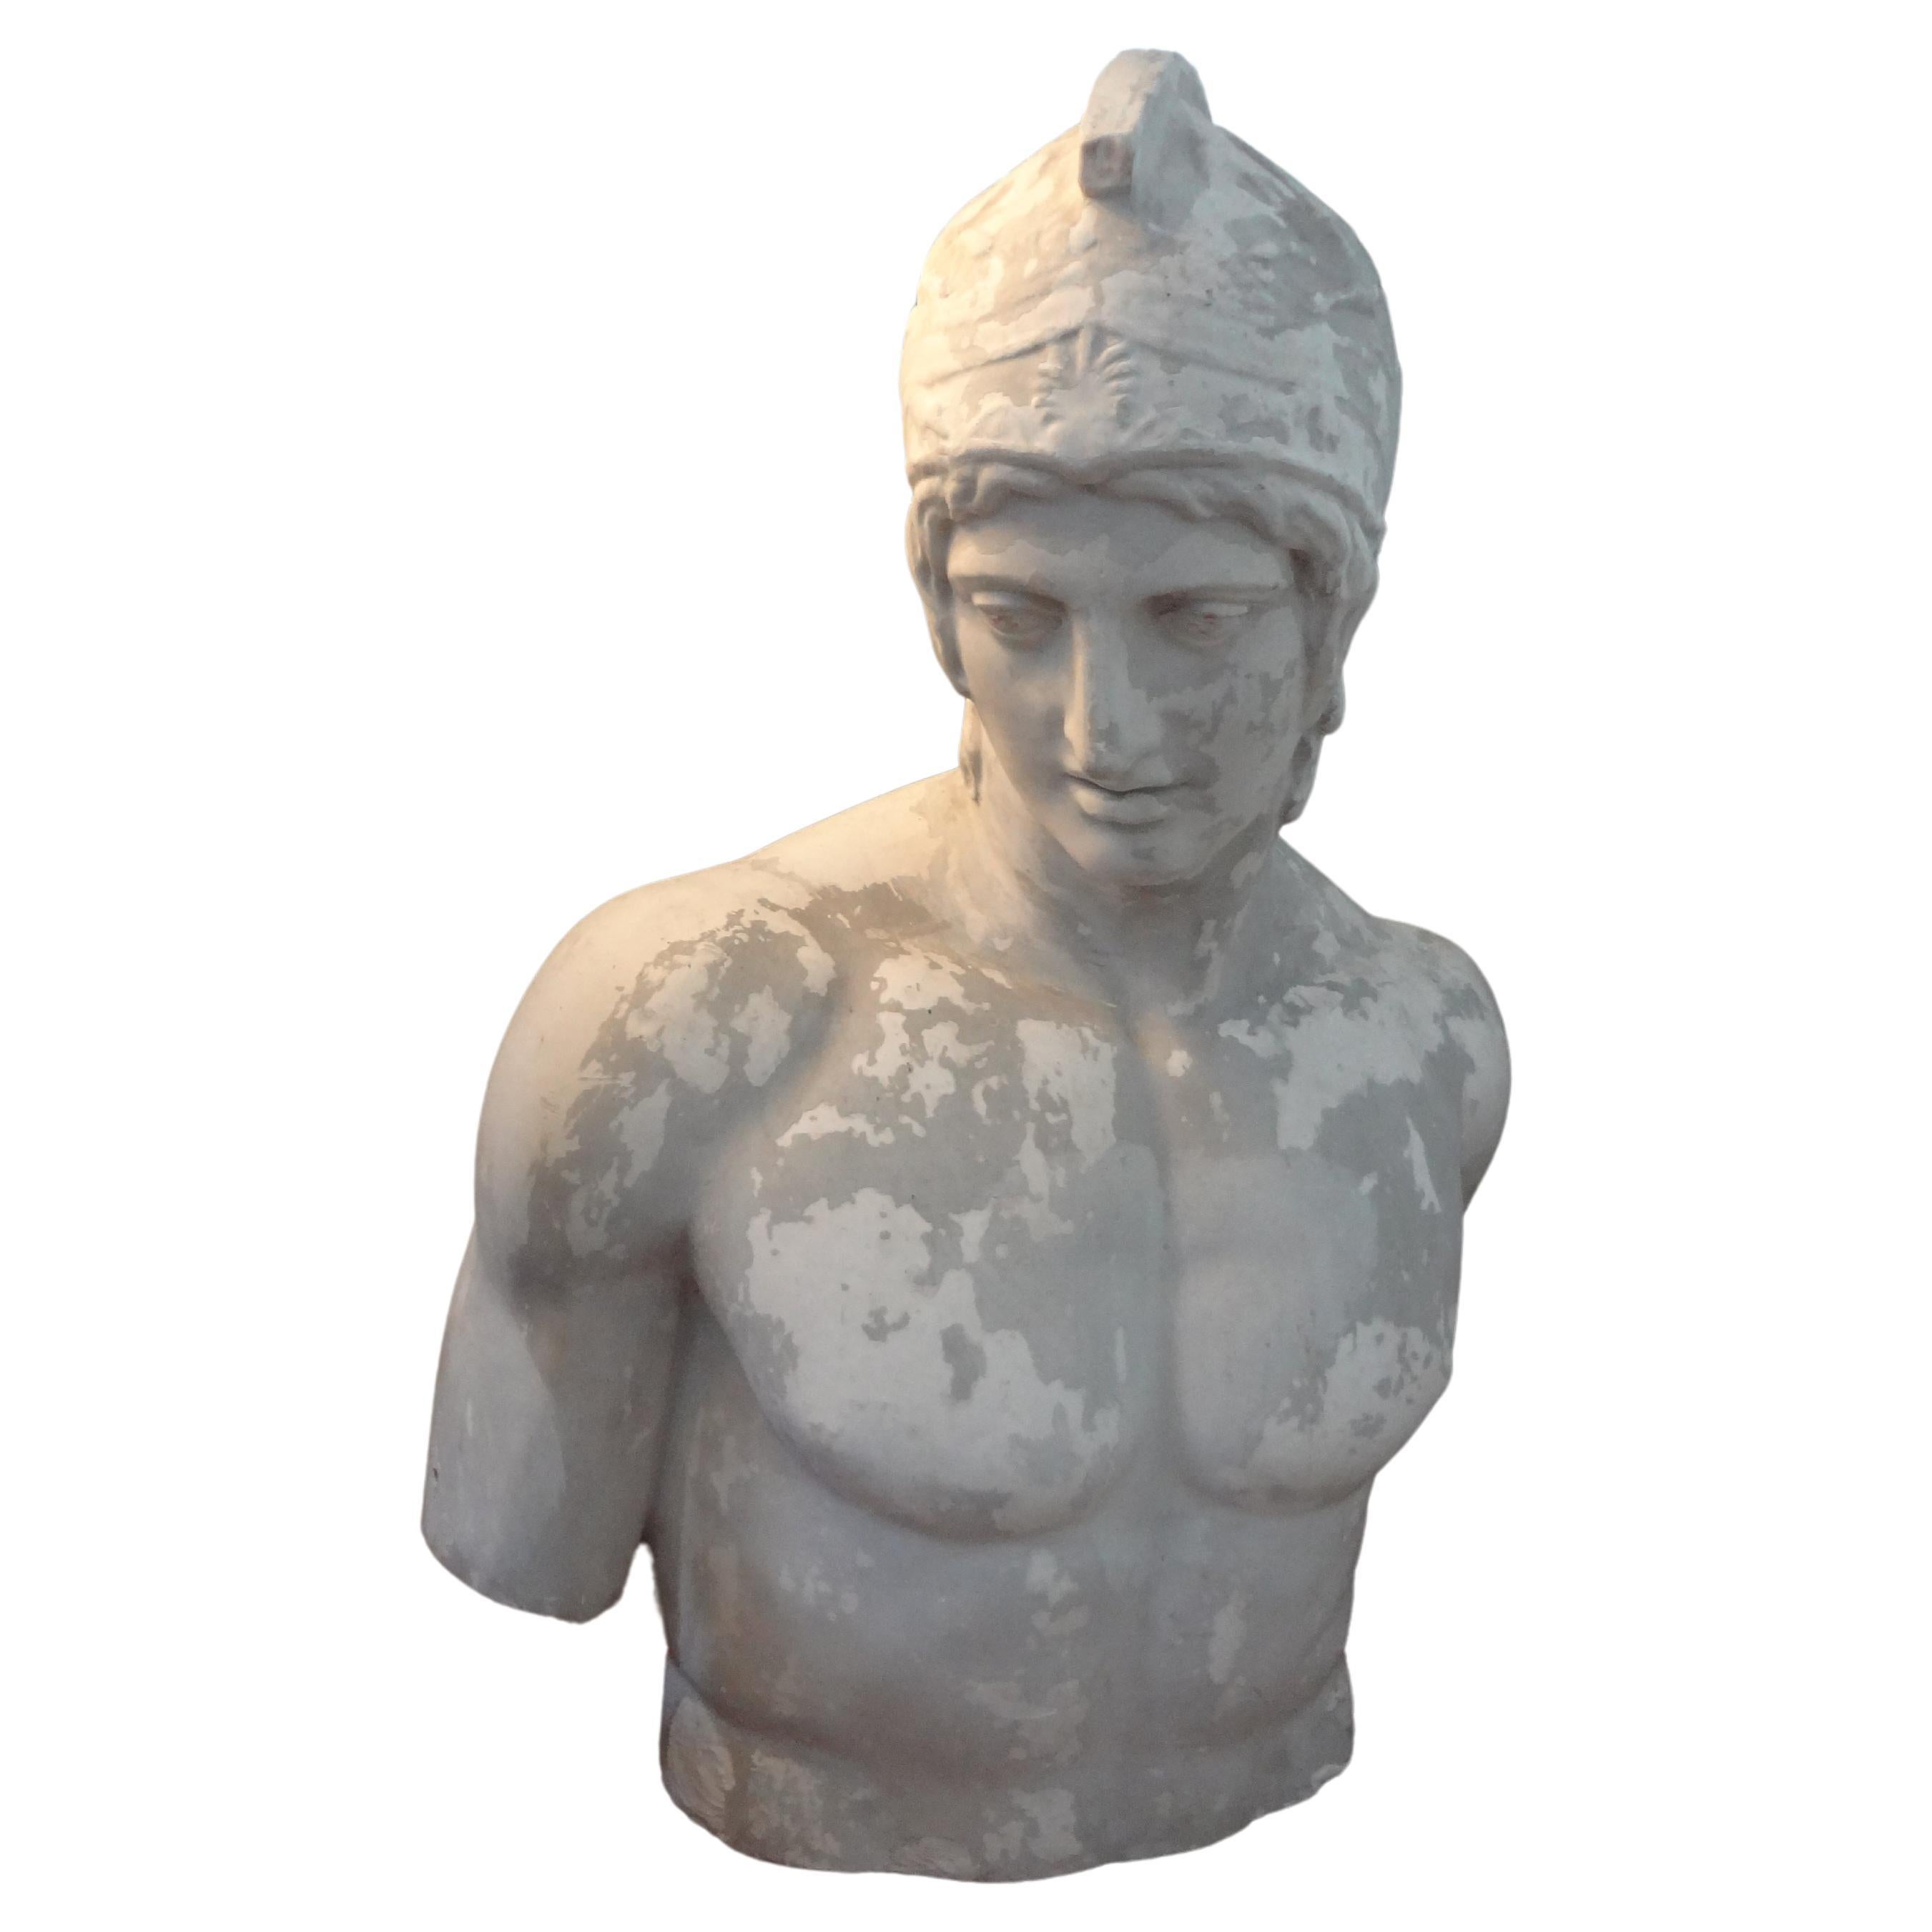 19th Century French Plaster Bust Of A Classical Greek.
Beautifully patinated monumental antique French plaster bust of a classical Greek male. This statement bust would be great displayed on a pedestal, console table, commode, credenza or center